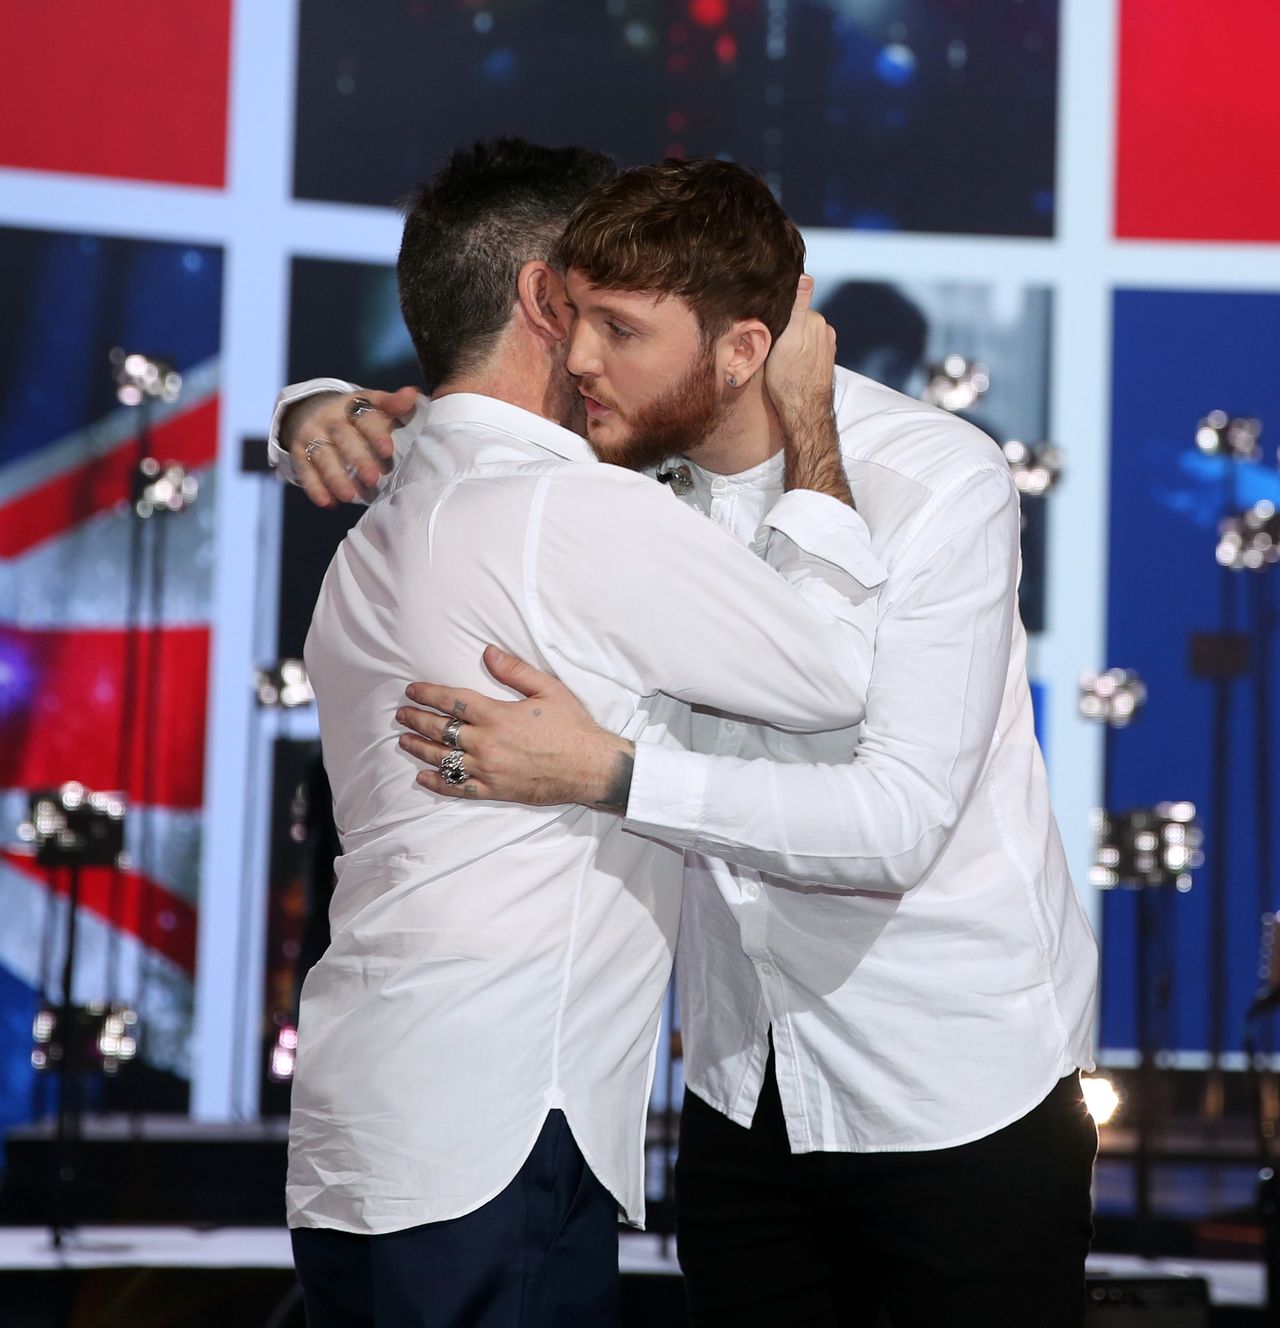 James was given a second chance by Simon Cowell